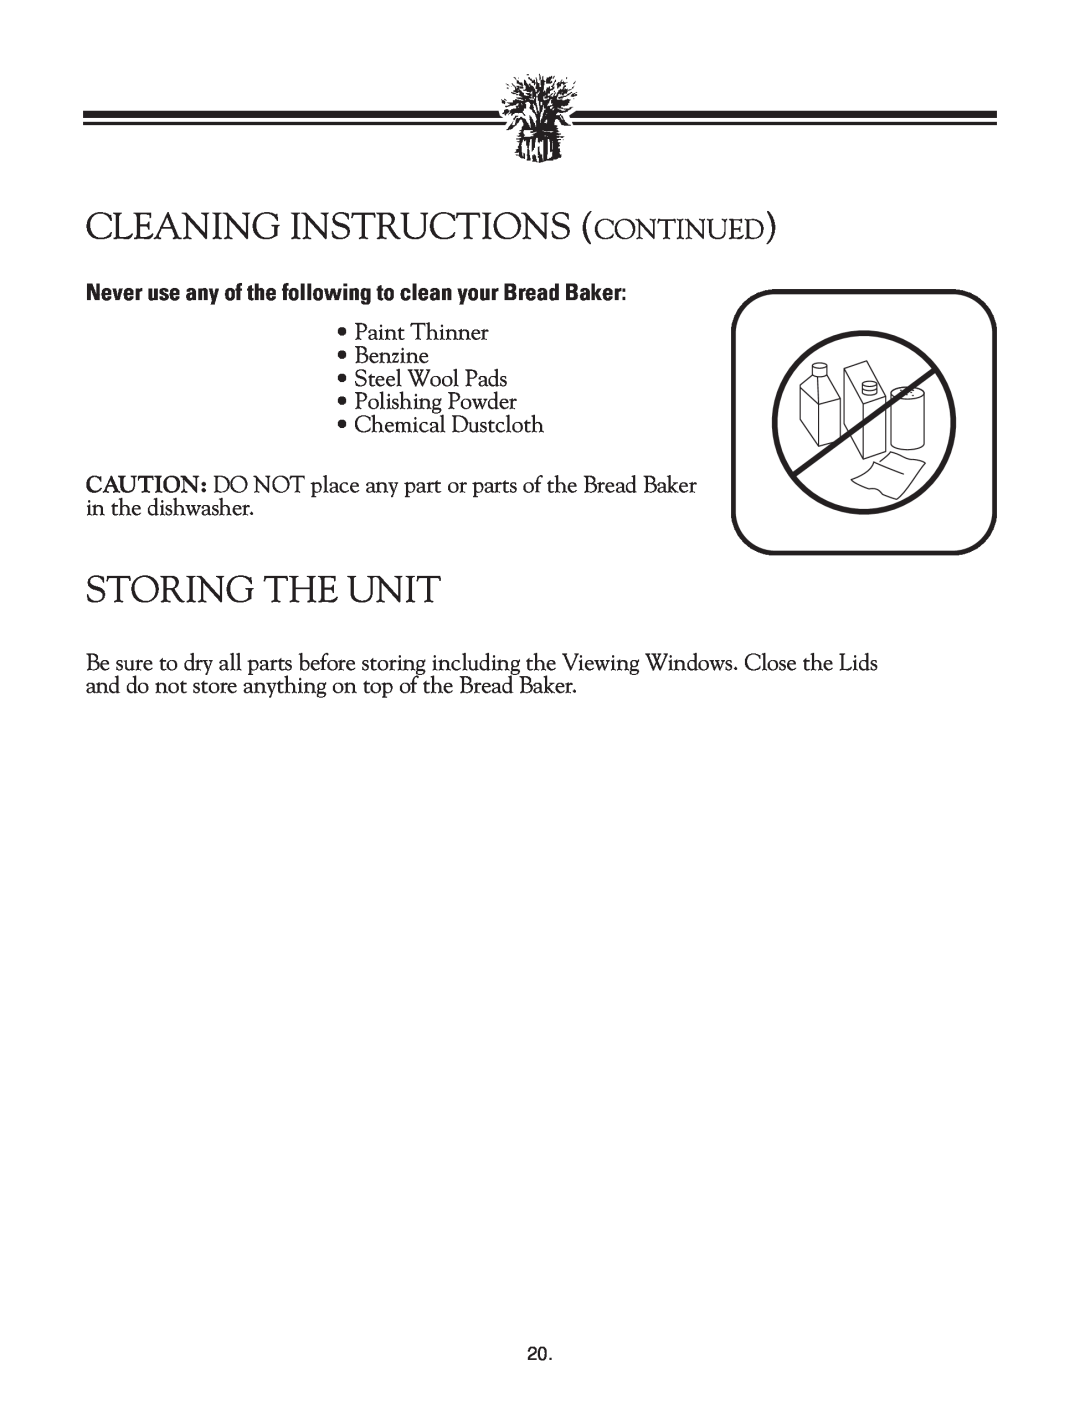 Breadman TR2828G Cleaning Instructions Continued, Storing The Unit, Paint Thinner Benzine Steel Wool Pads 